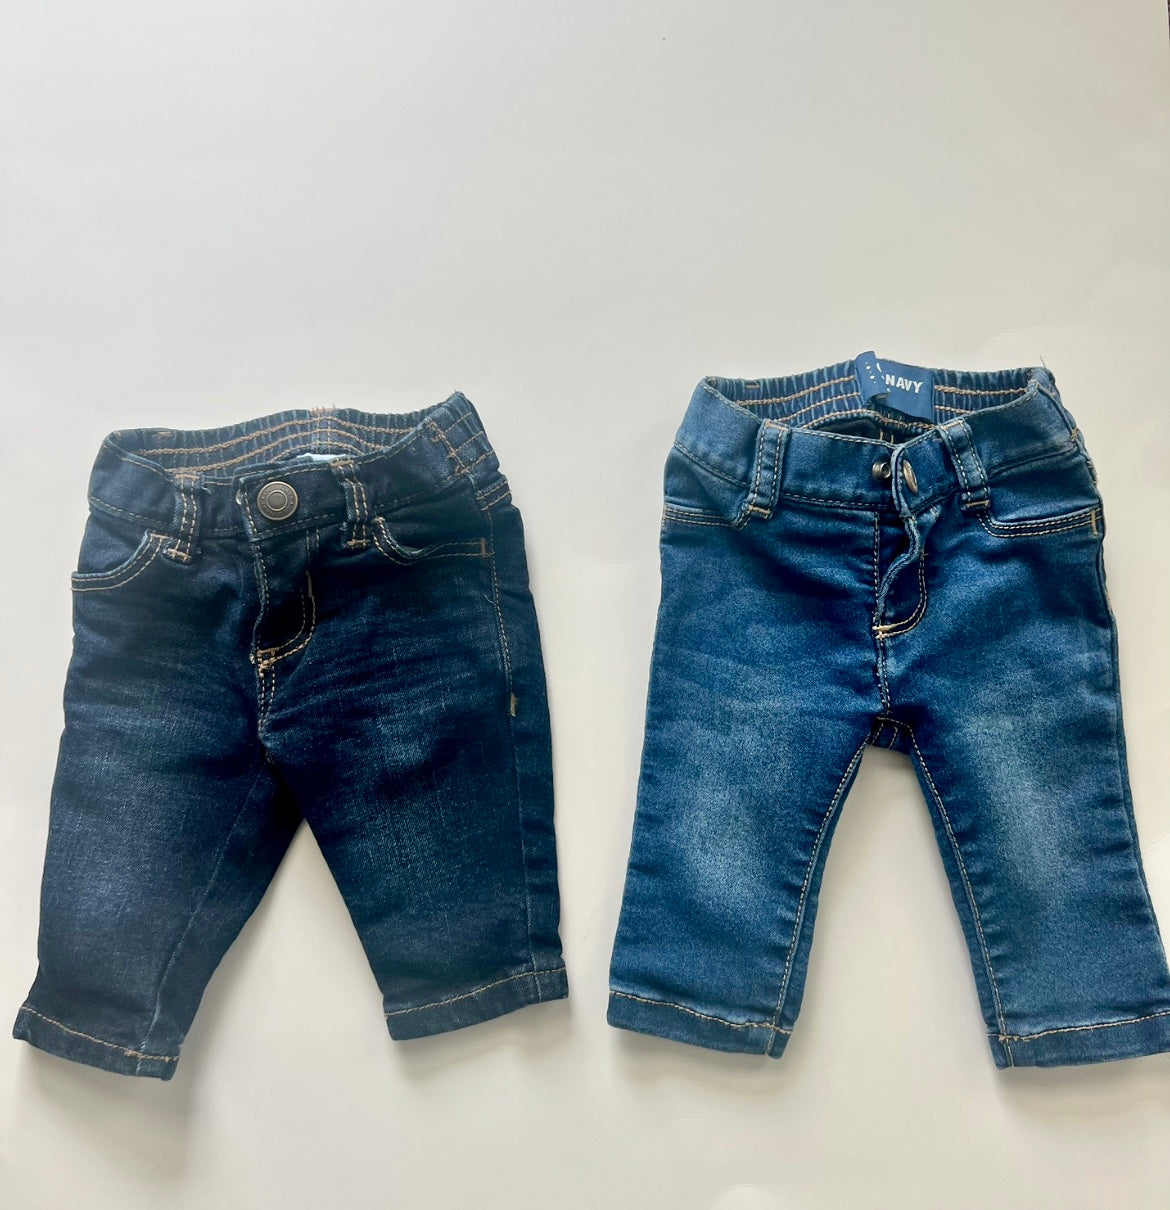 Girls 0-3 Months Old Navy Baby Jeans - Set of Two